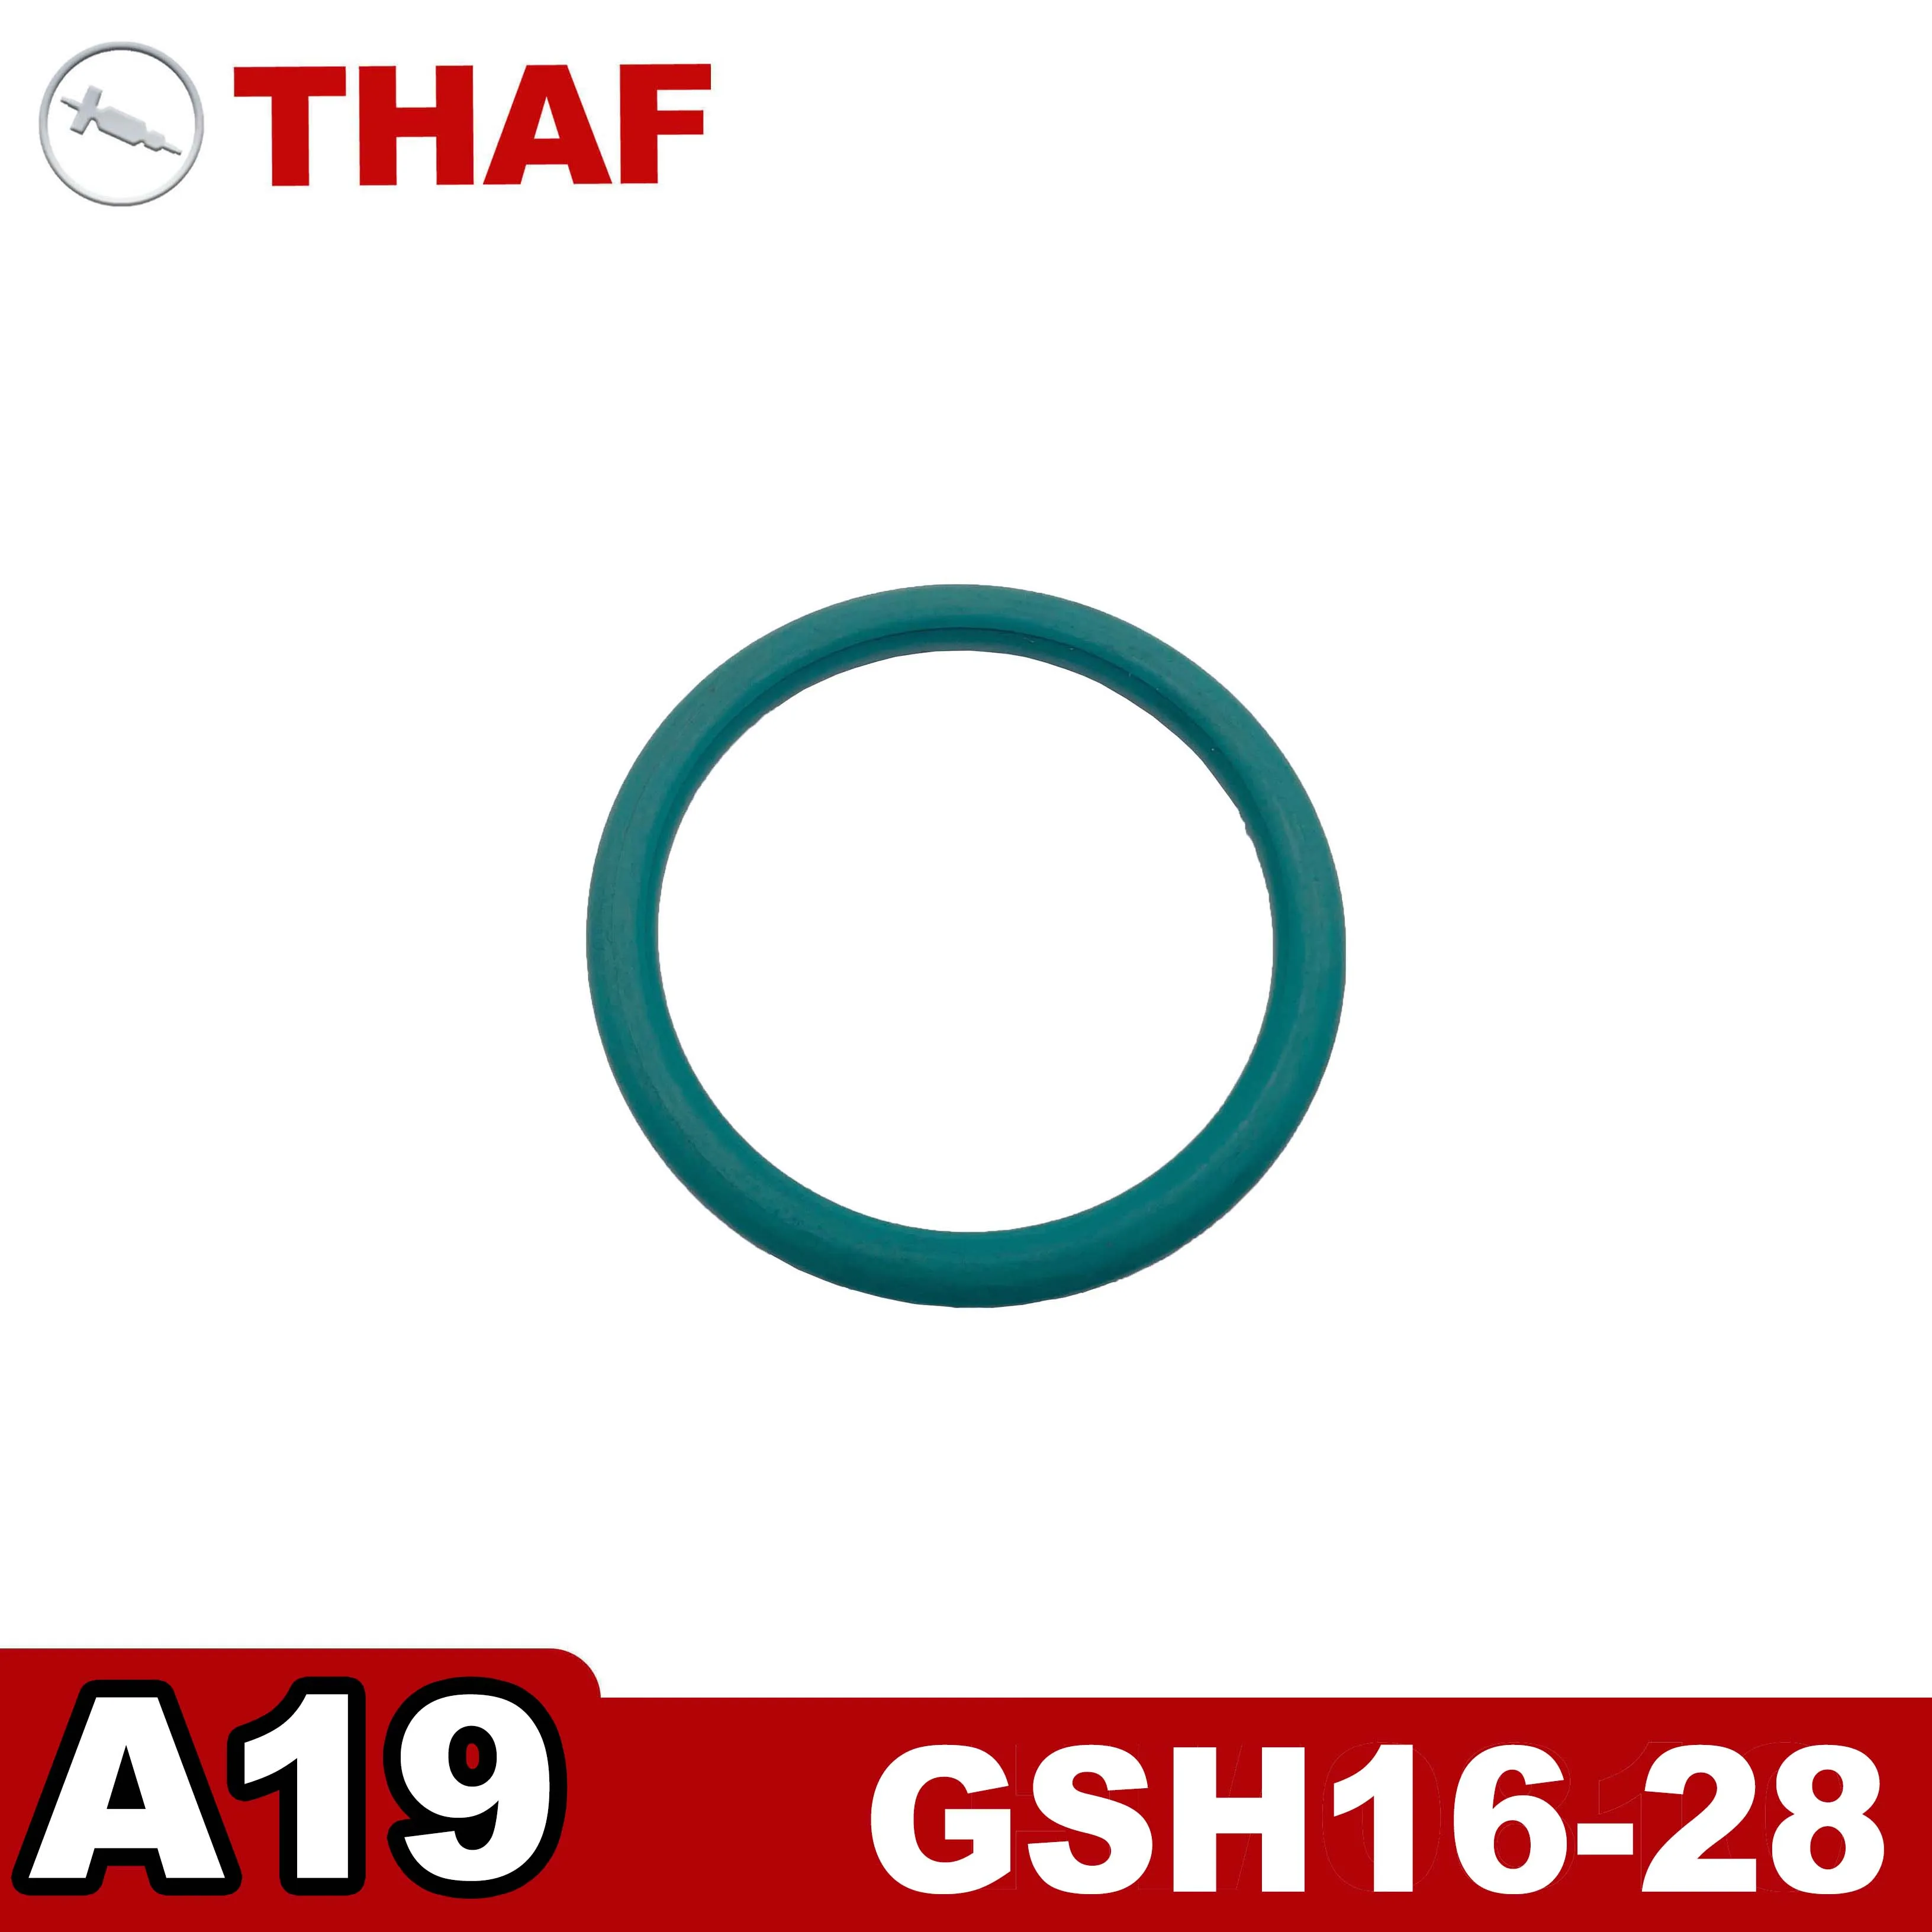 

Replacement Spare Parts O-Ring D58X5.35 for Bosch Demolition Hammer GSH16-28 GSH16-30 A19